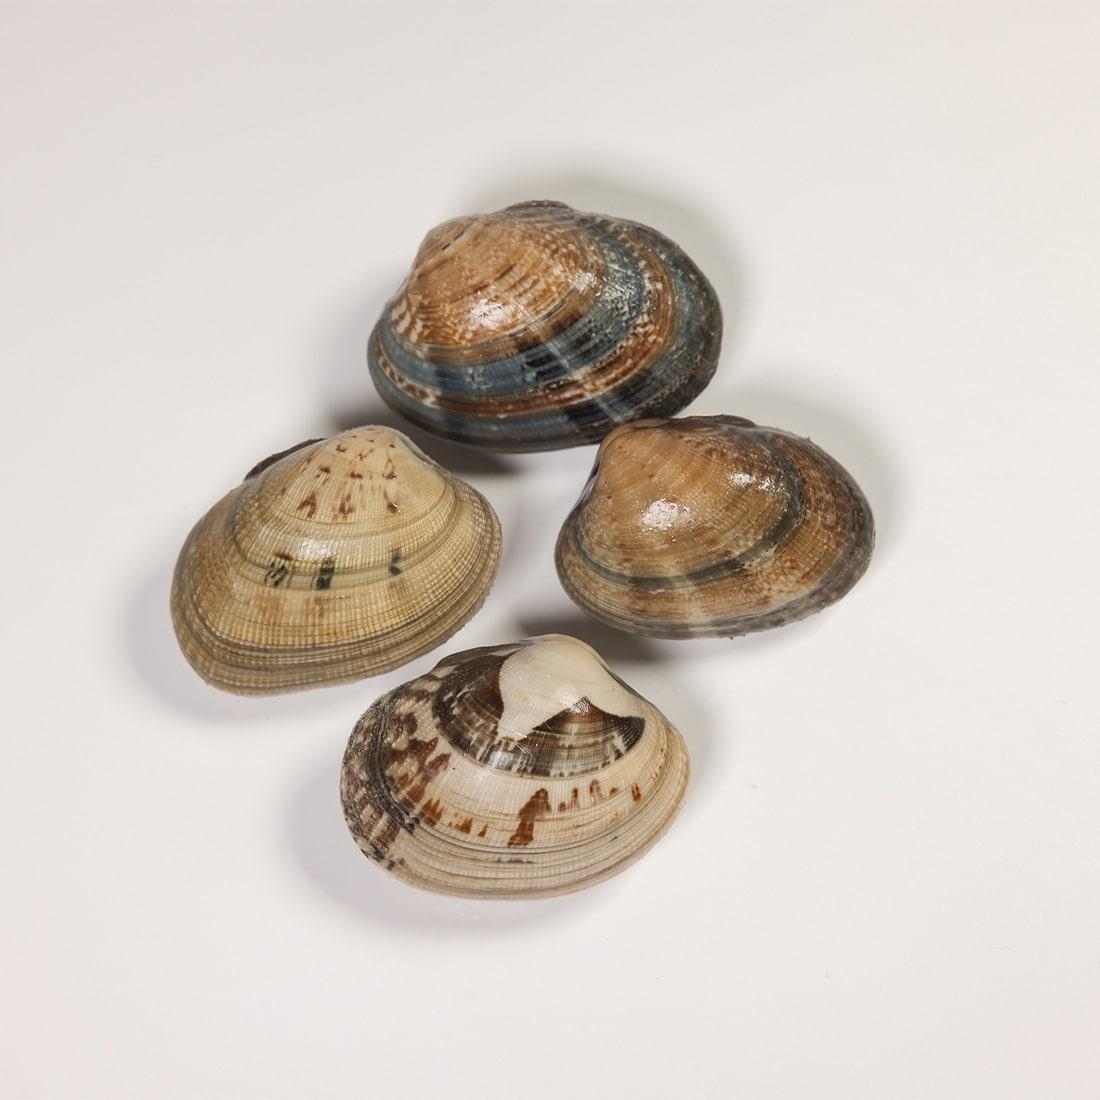 True Venus clams with shells - Cover Image